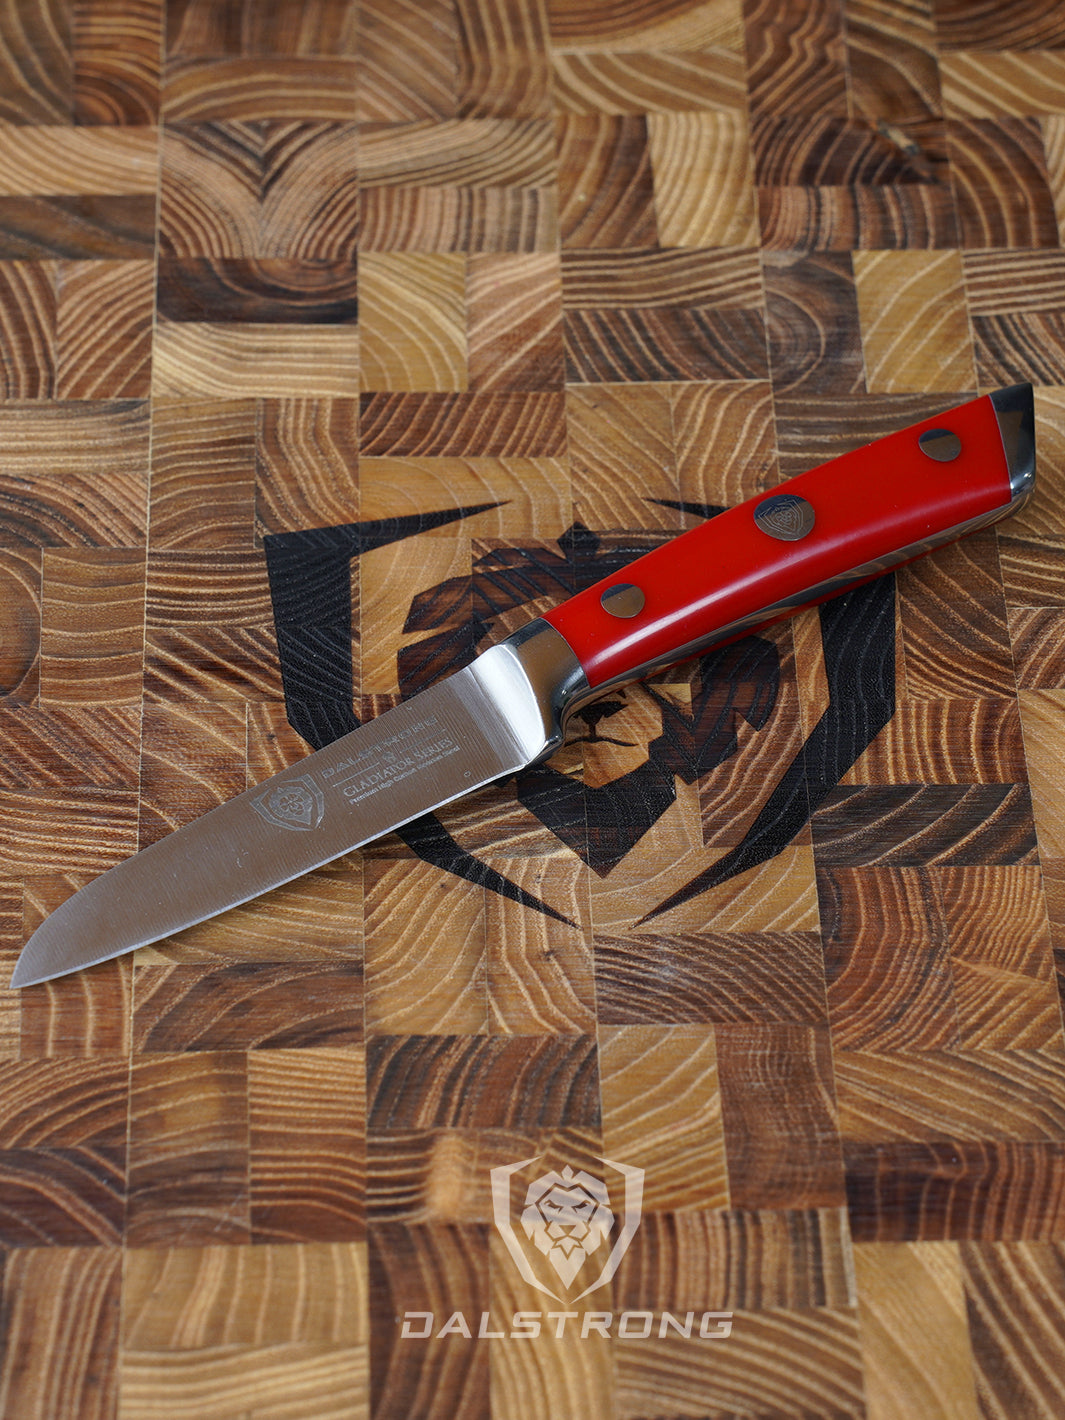 Dalstrong gladiator series 3.5 inch paring knife with red handle in top of a dalstrong wooden cutting board.